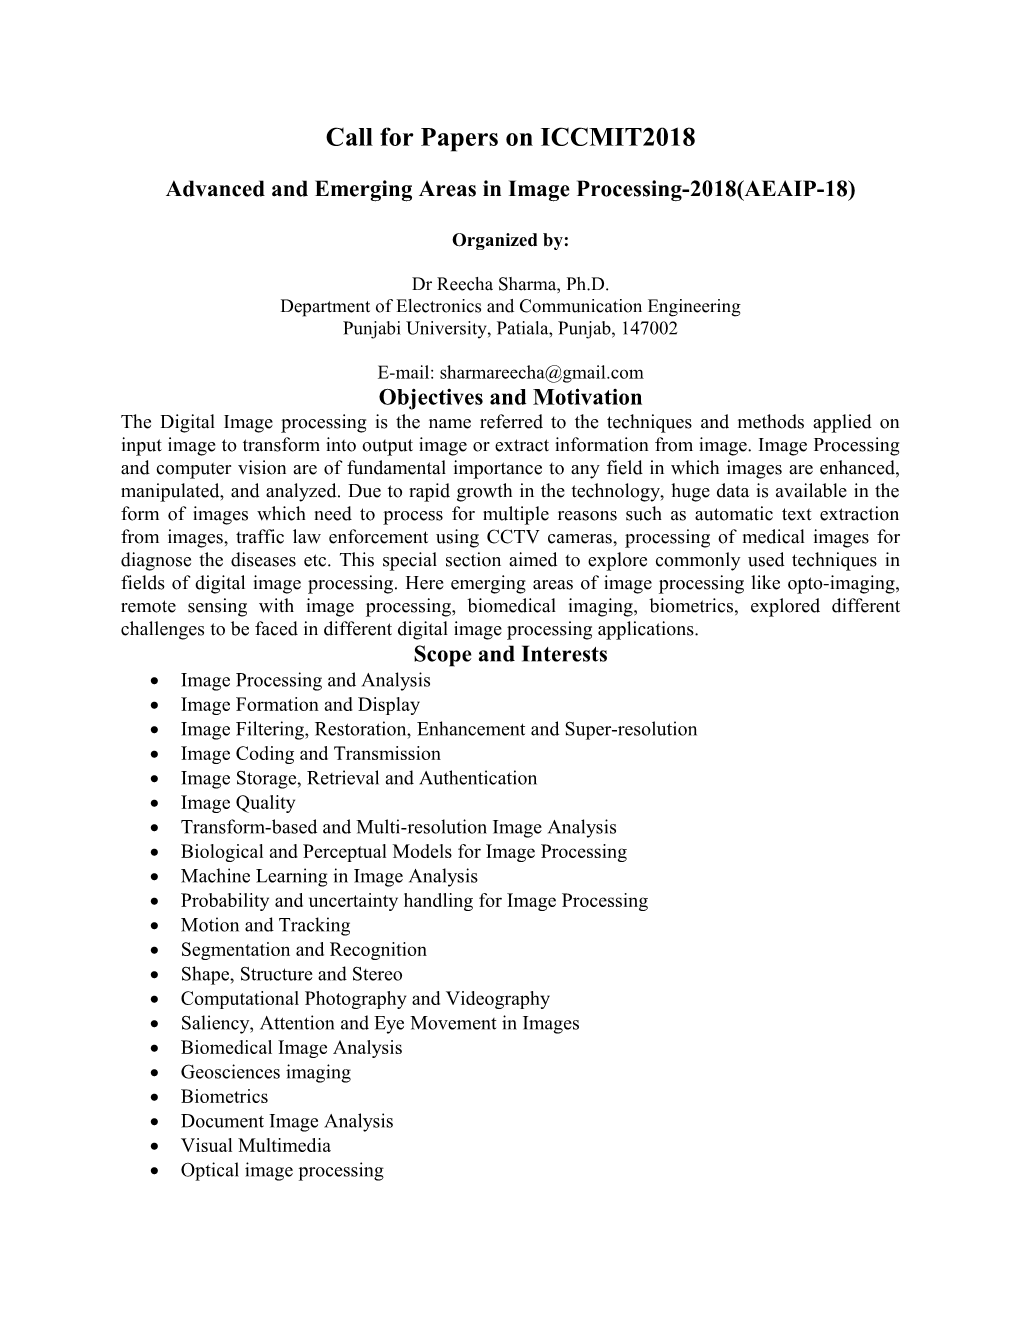 Advanced and Emerging Areas in Image Processing-2018(AEAIP-18)